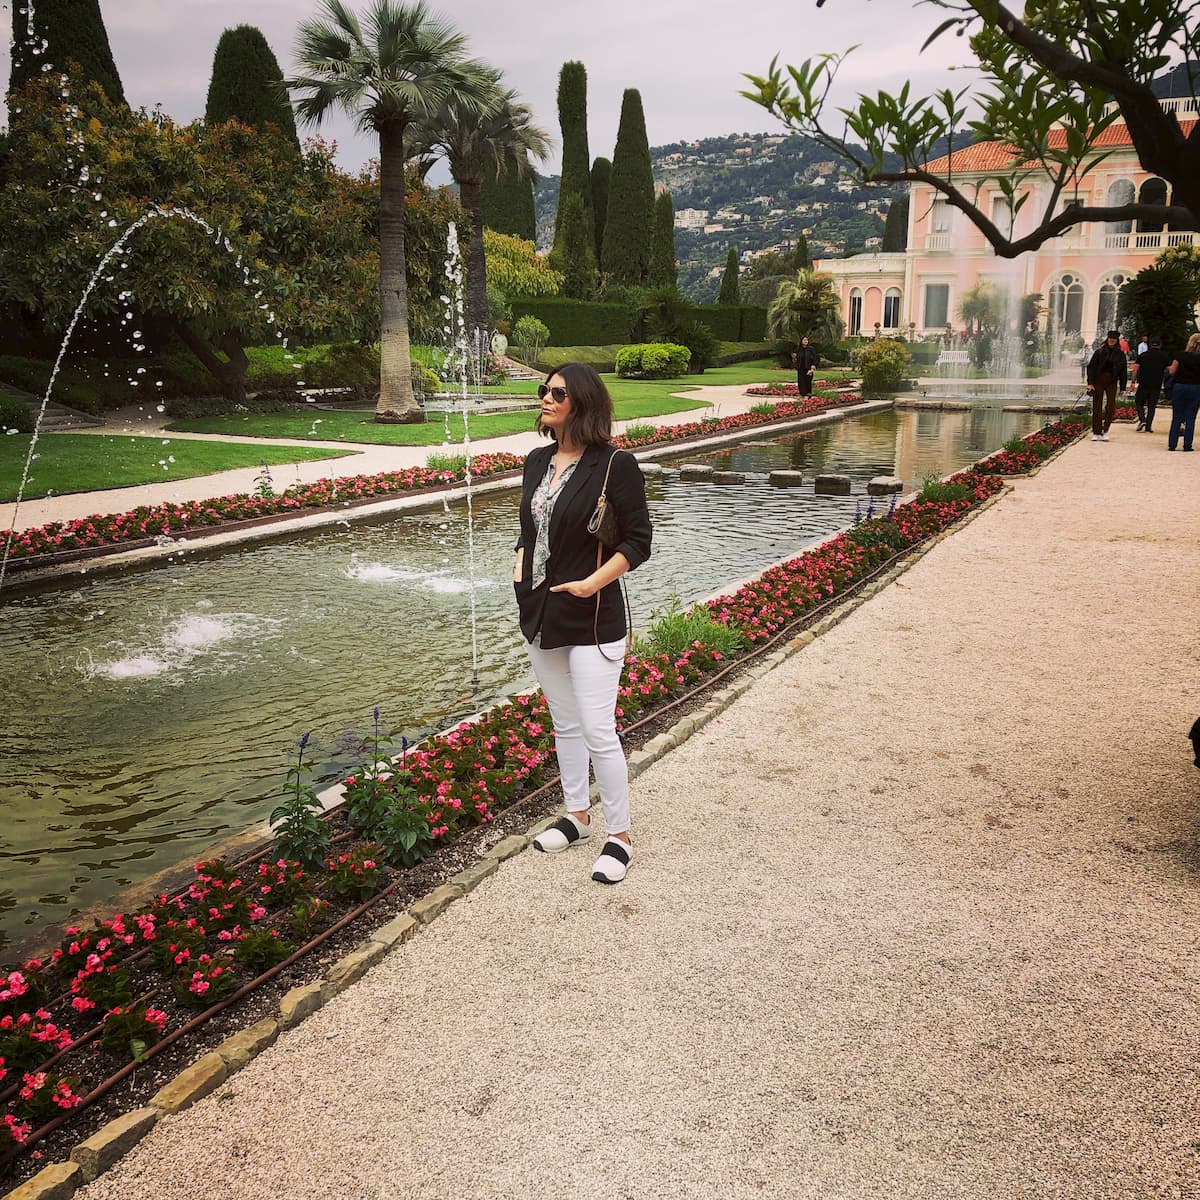 You are currently viewing Villa Ephrussi de Rothschild